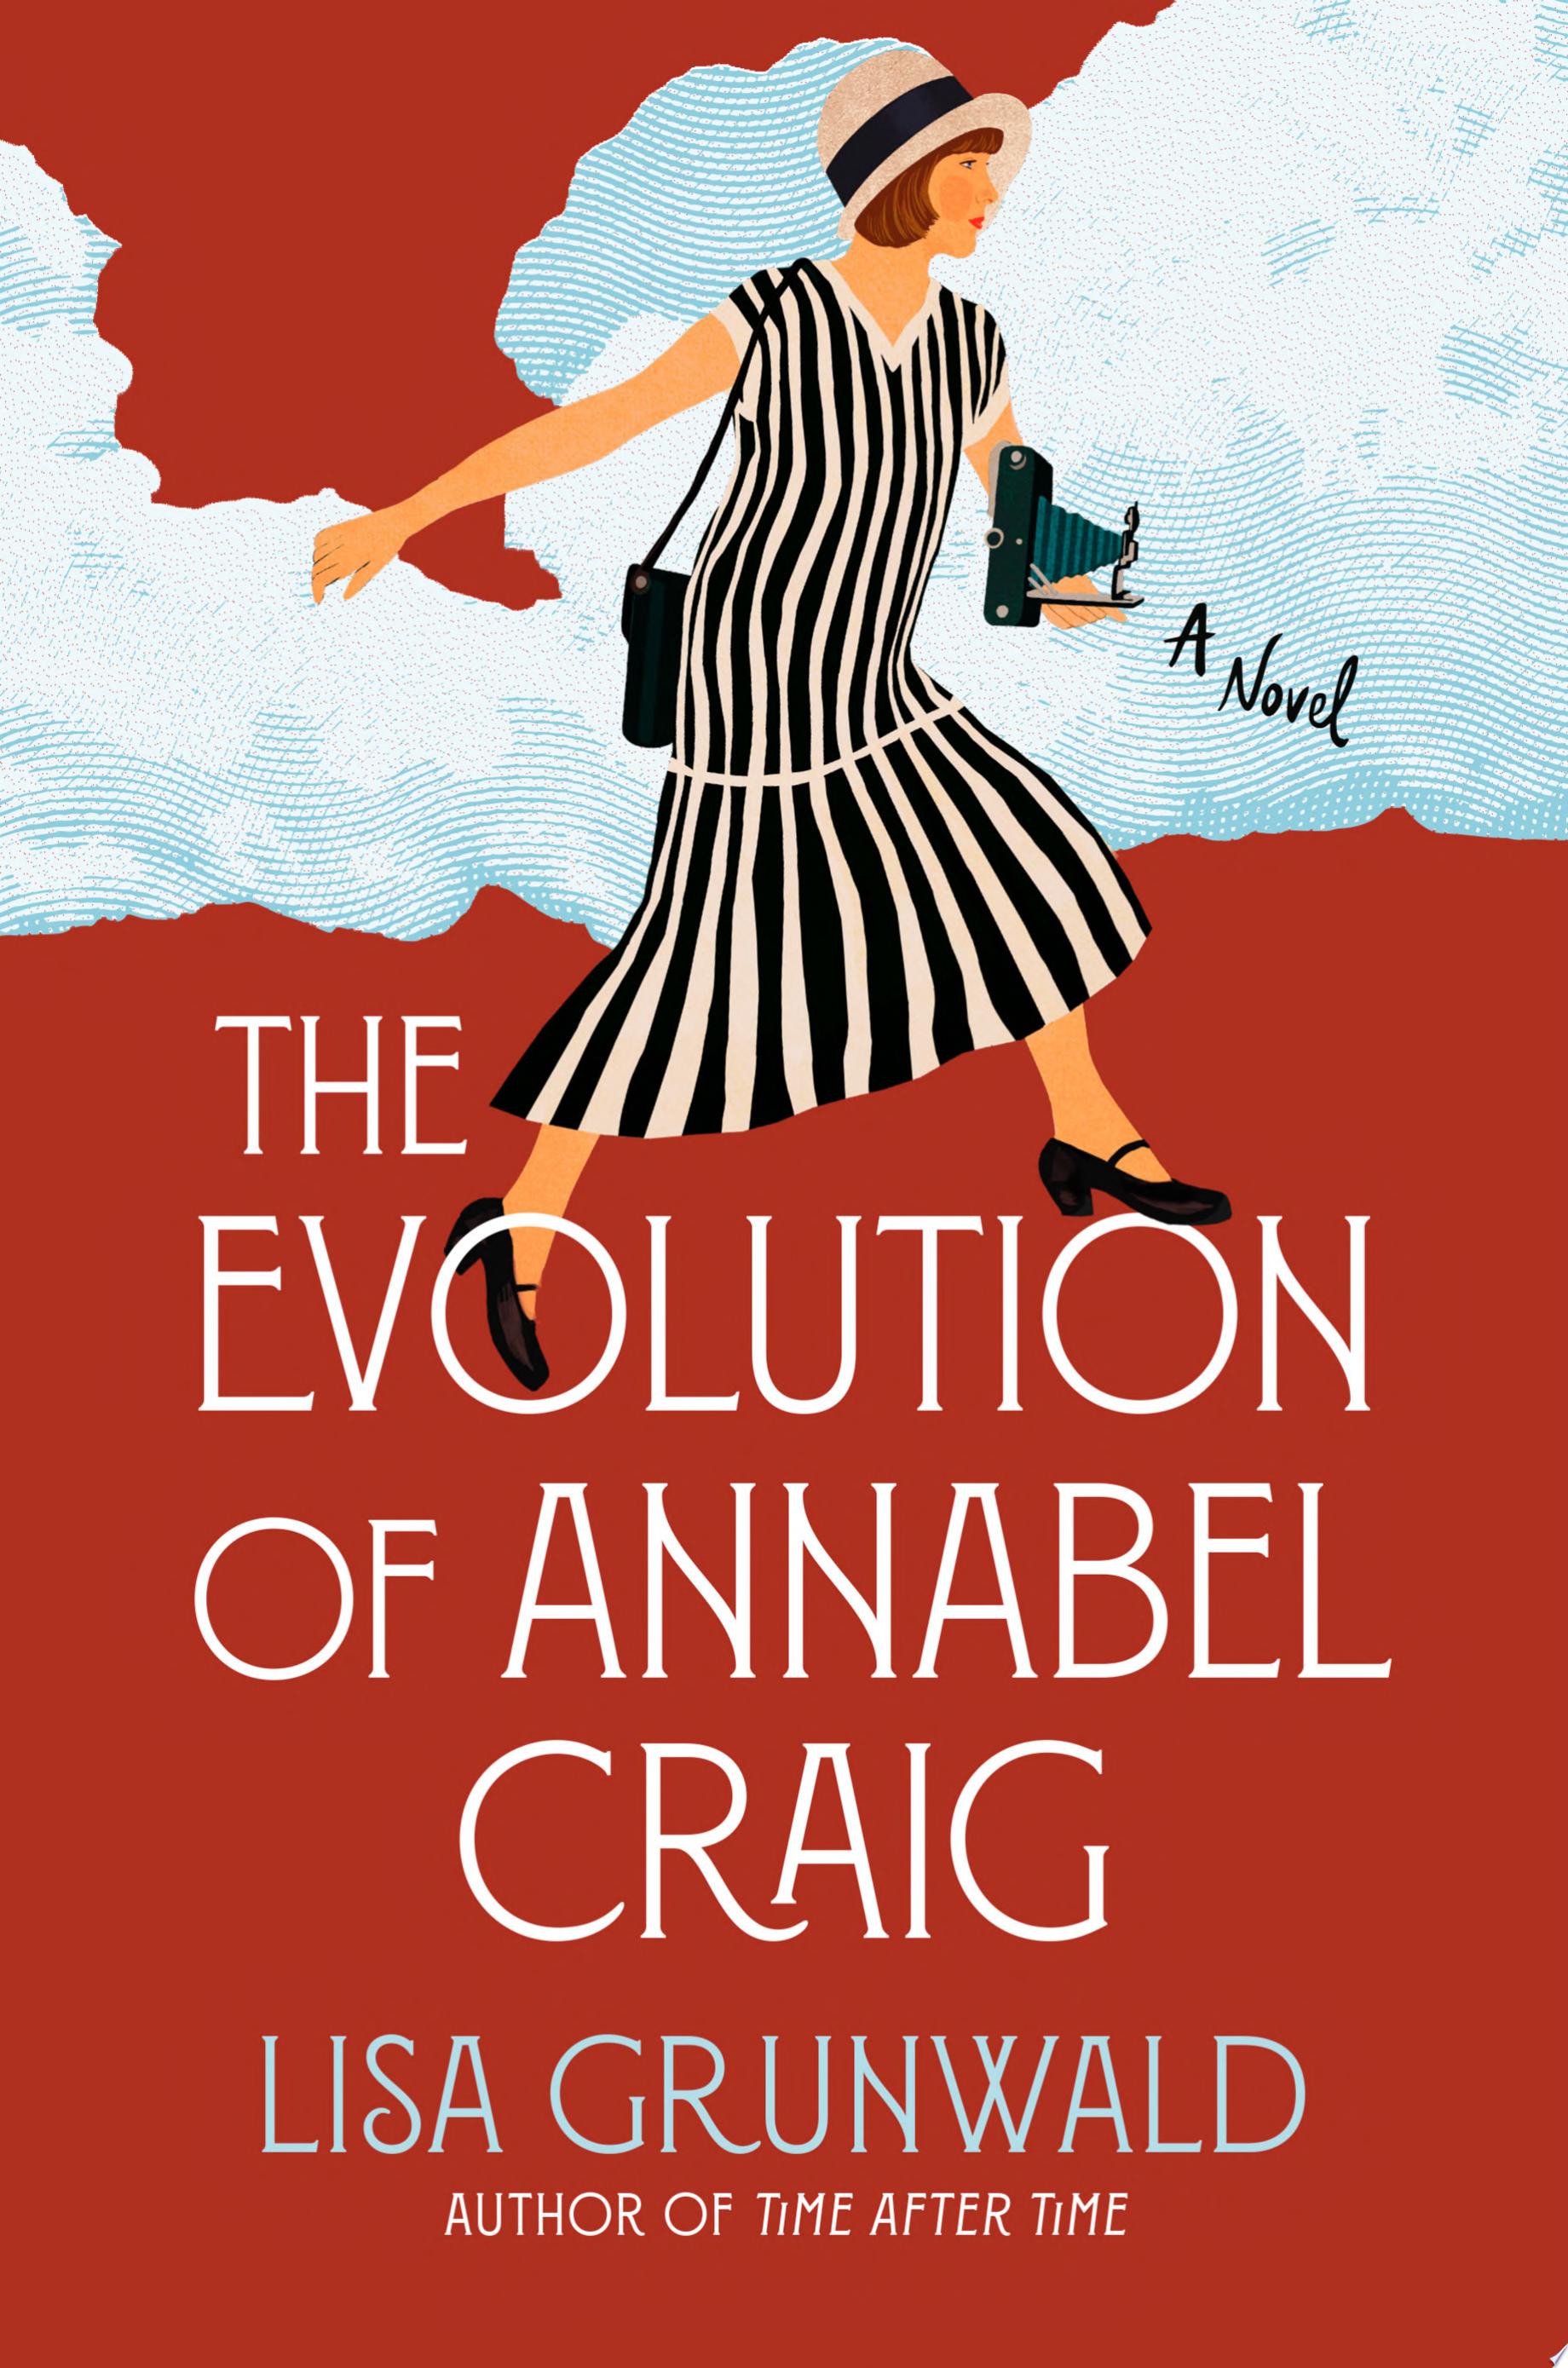 Image for "The Evolution of Annabel Craig"